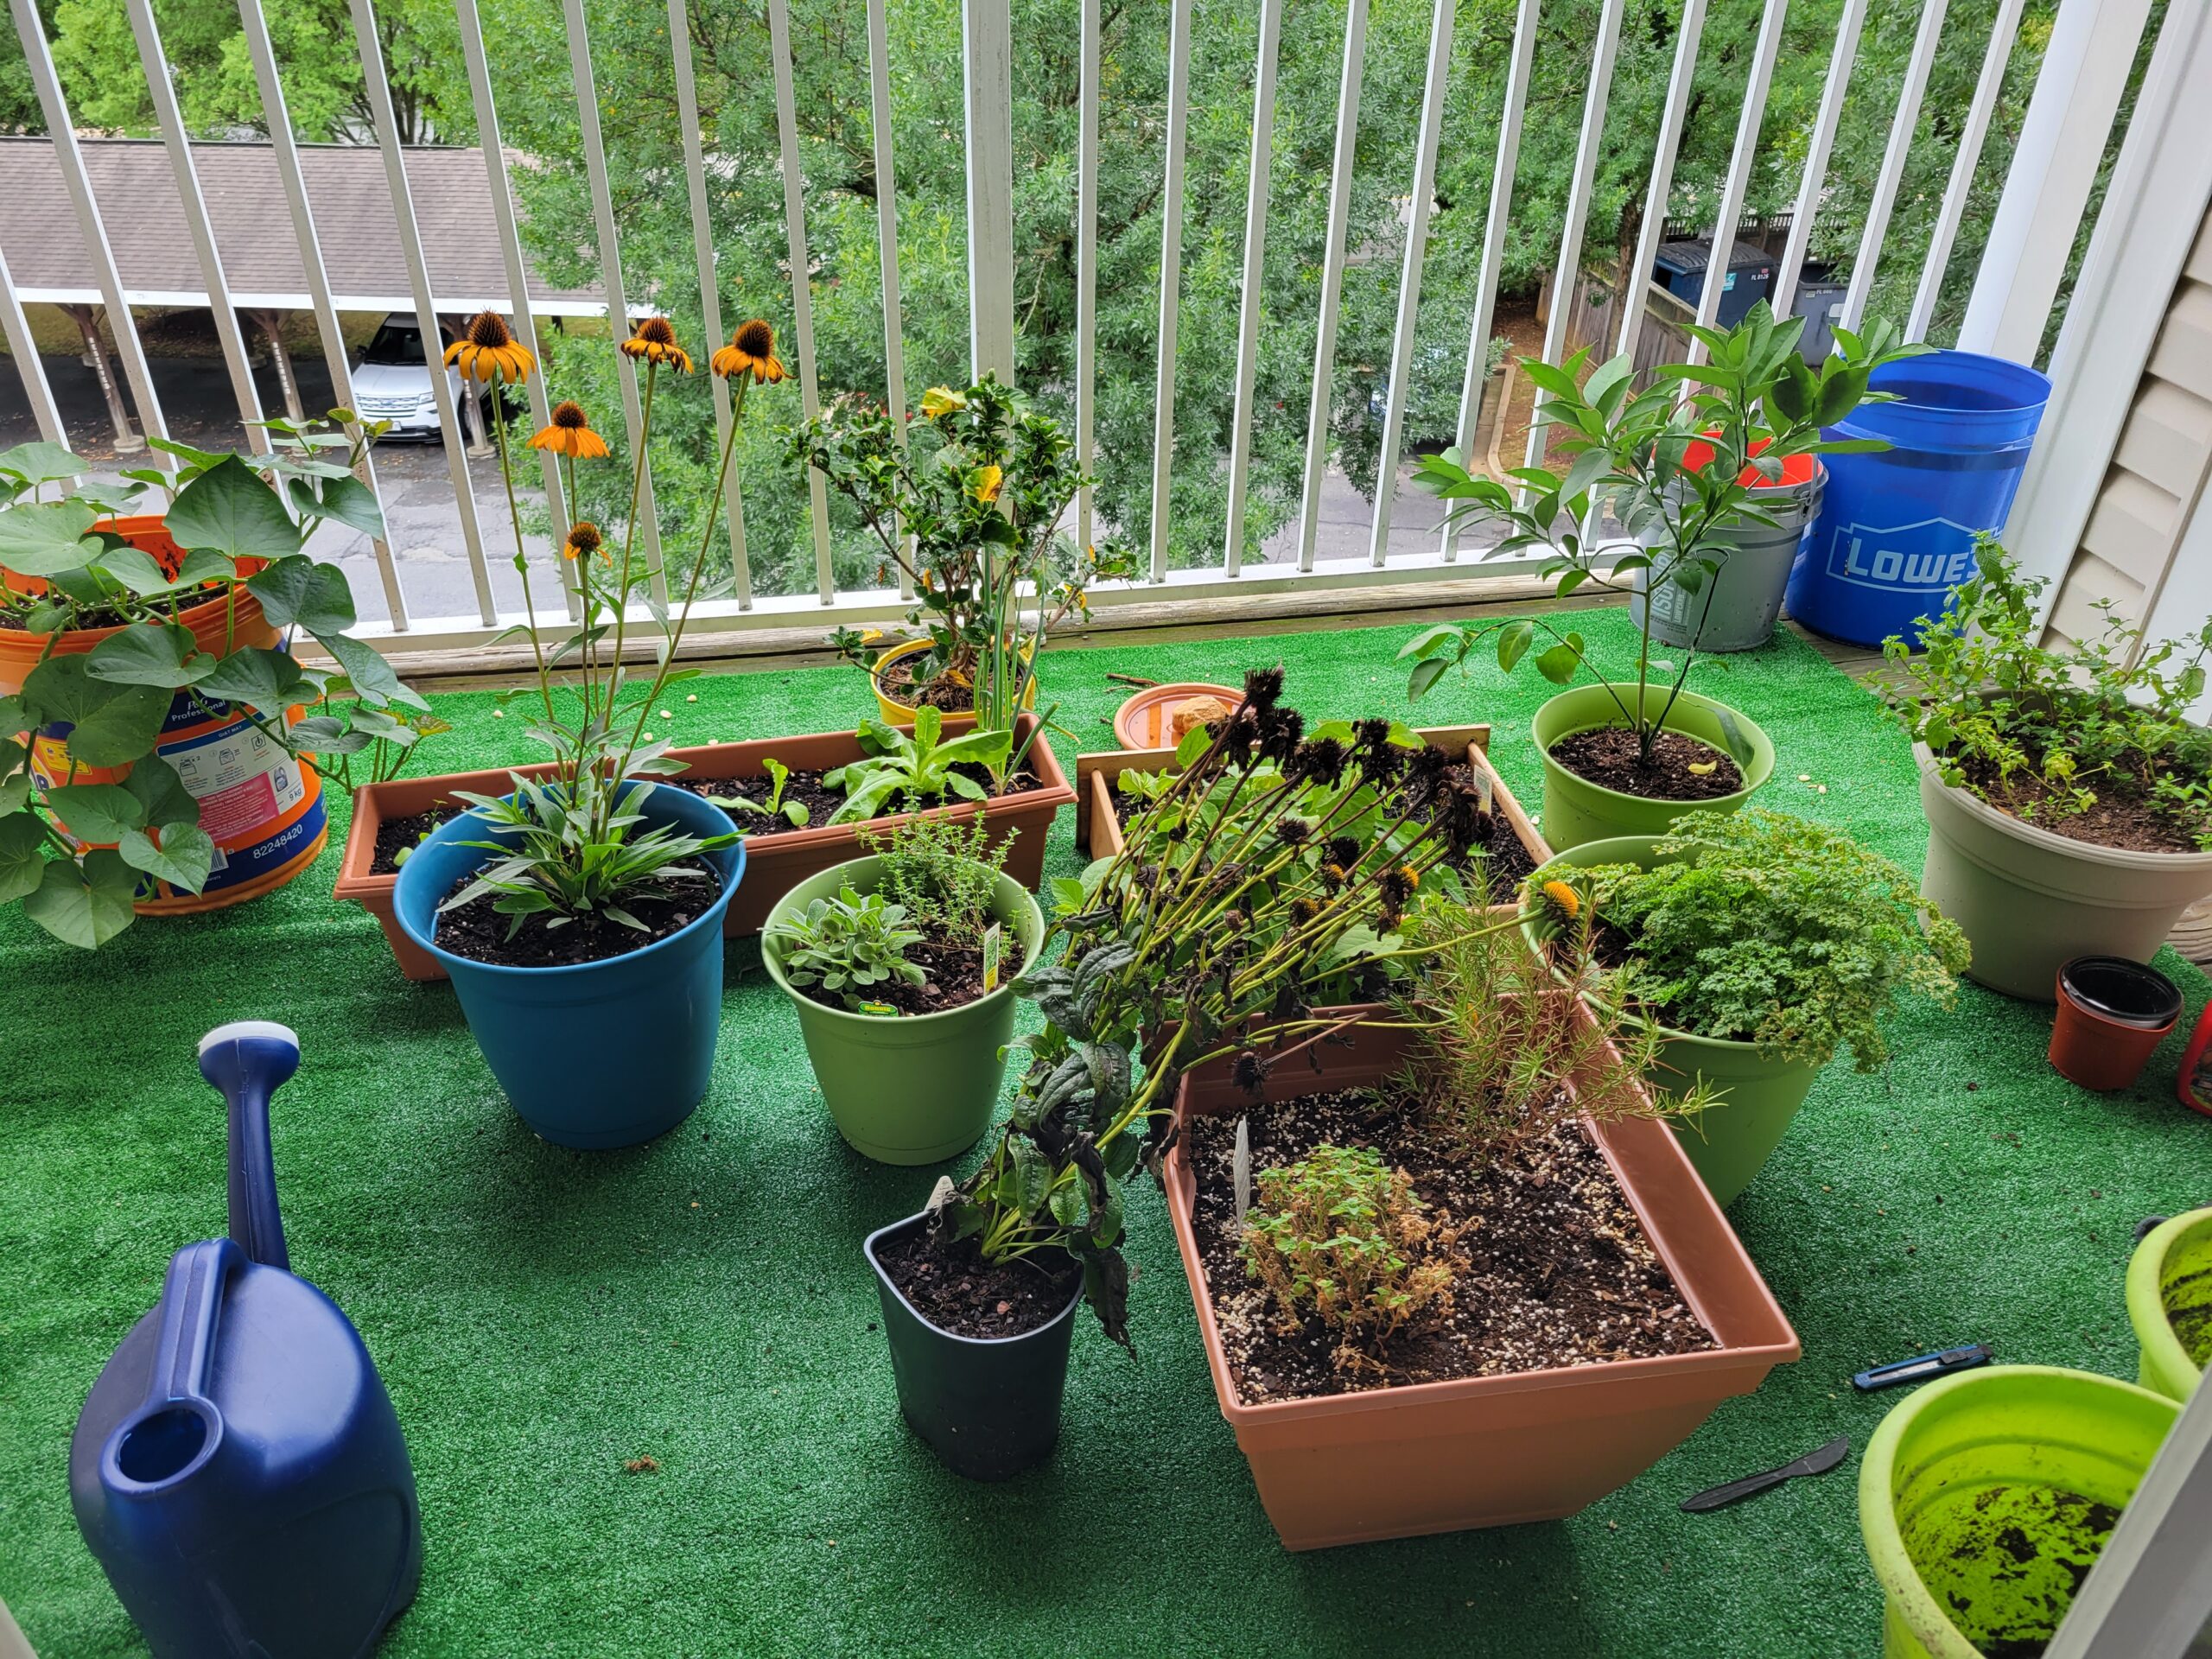 Photo of a container garden on a fourth-floor balcony lined with astroturf. The plants growing include: sweet potato in a bucket, coneflowers, lettuce, hibiscus, sage, thyme, rosemary, parsley, a Meyer lemon sapling, mint. There are also a few empty containers and a watering can.